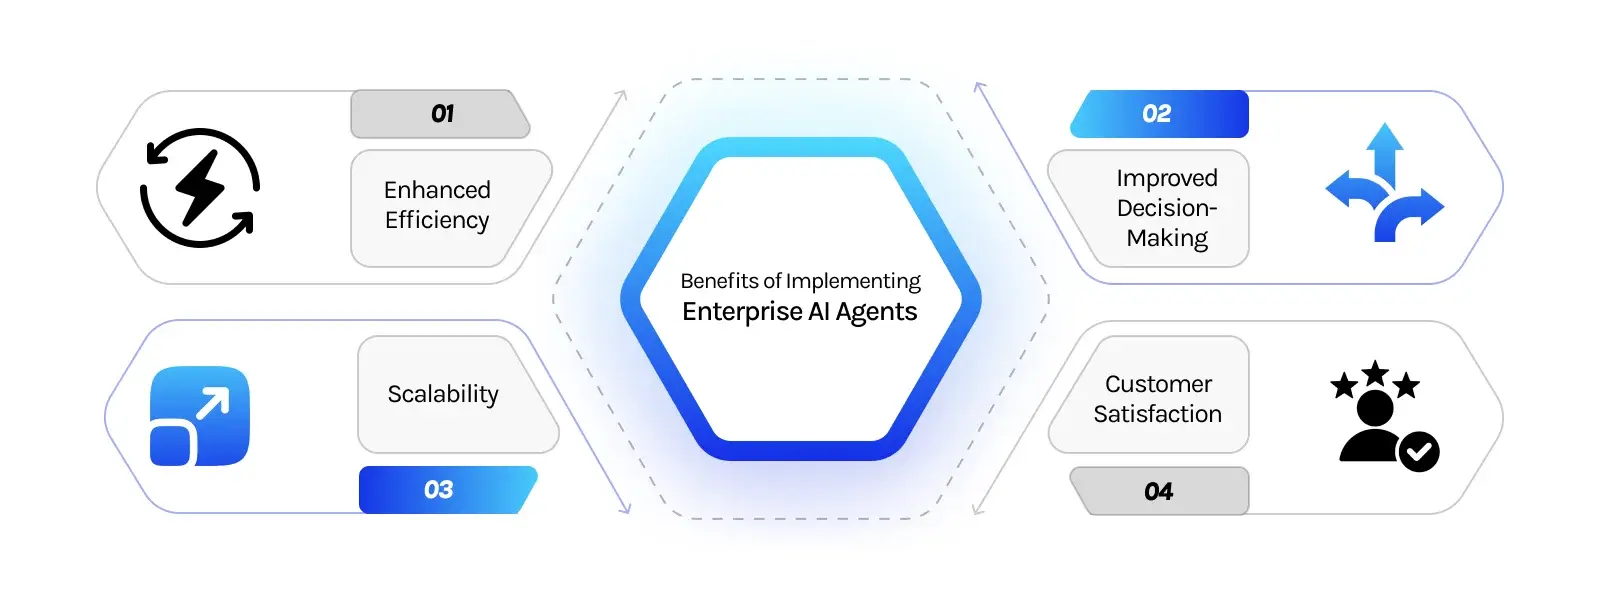 Benefits of Implementing Enterprise AI Agents